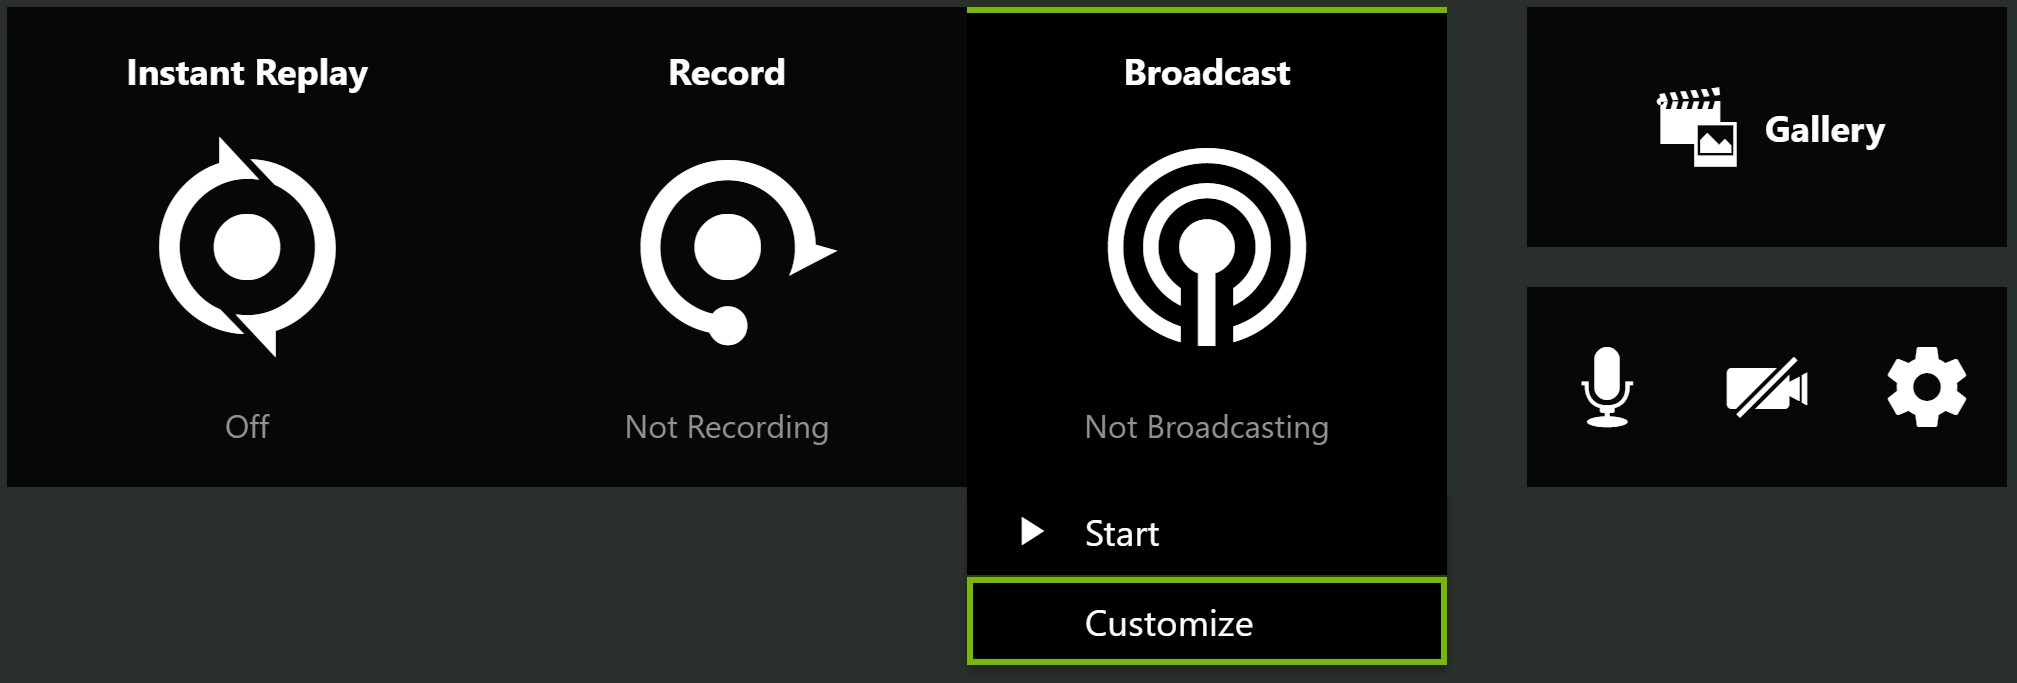 nvidia geforce broadcast to twitch failed